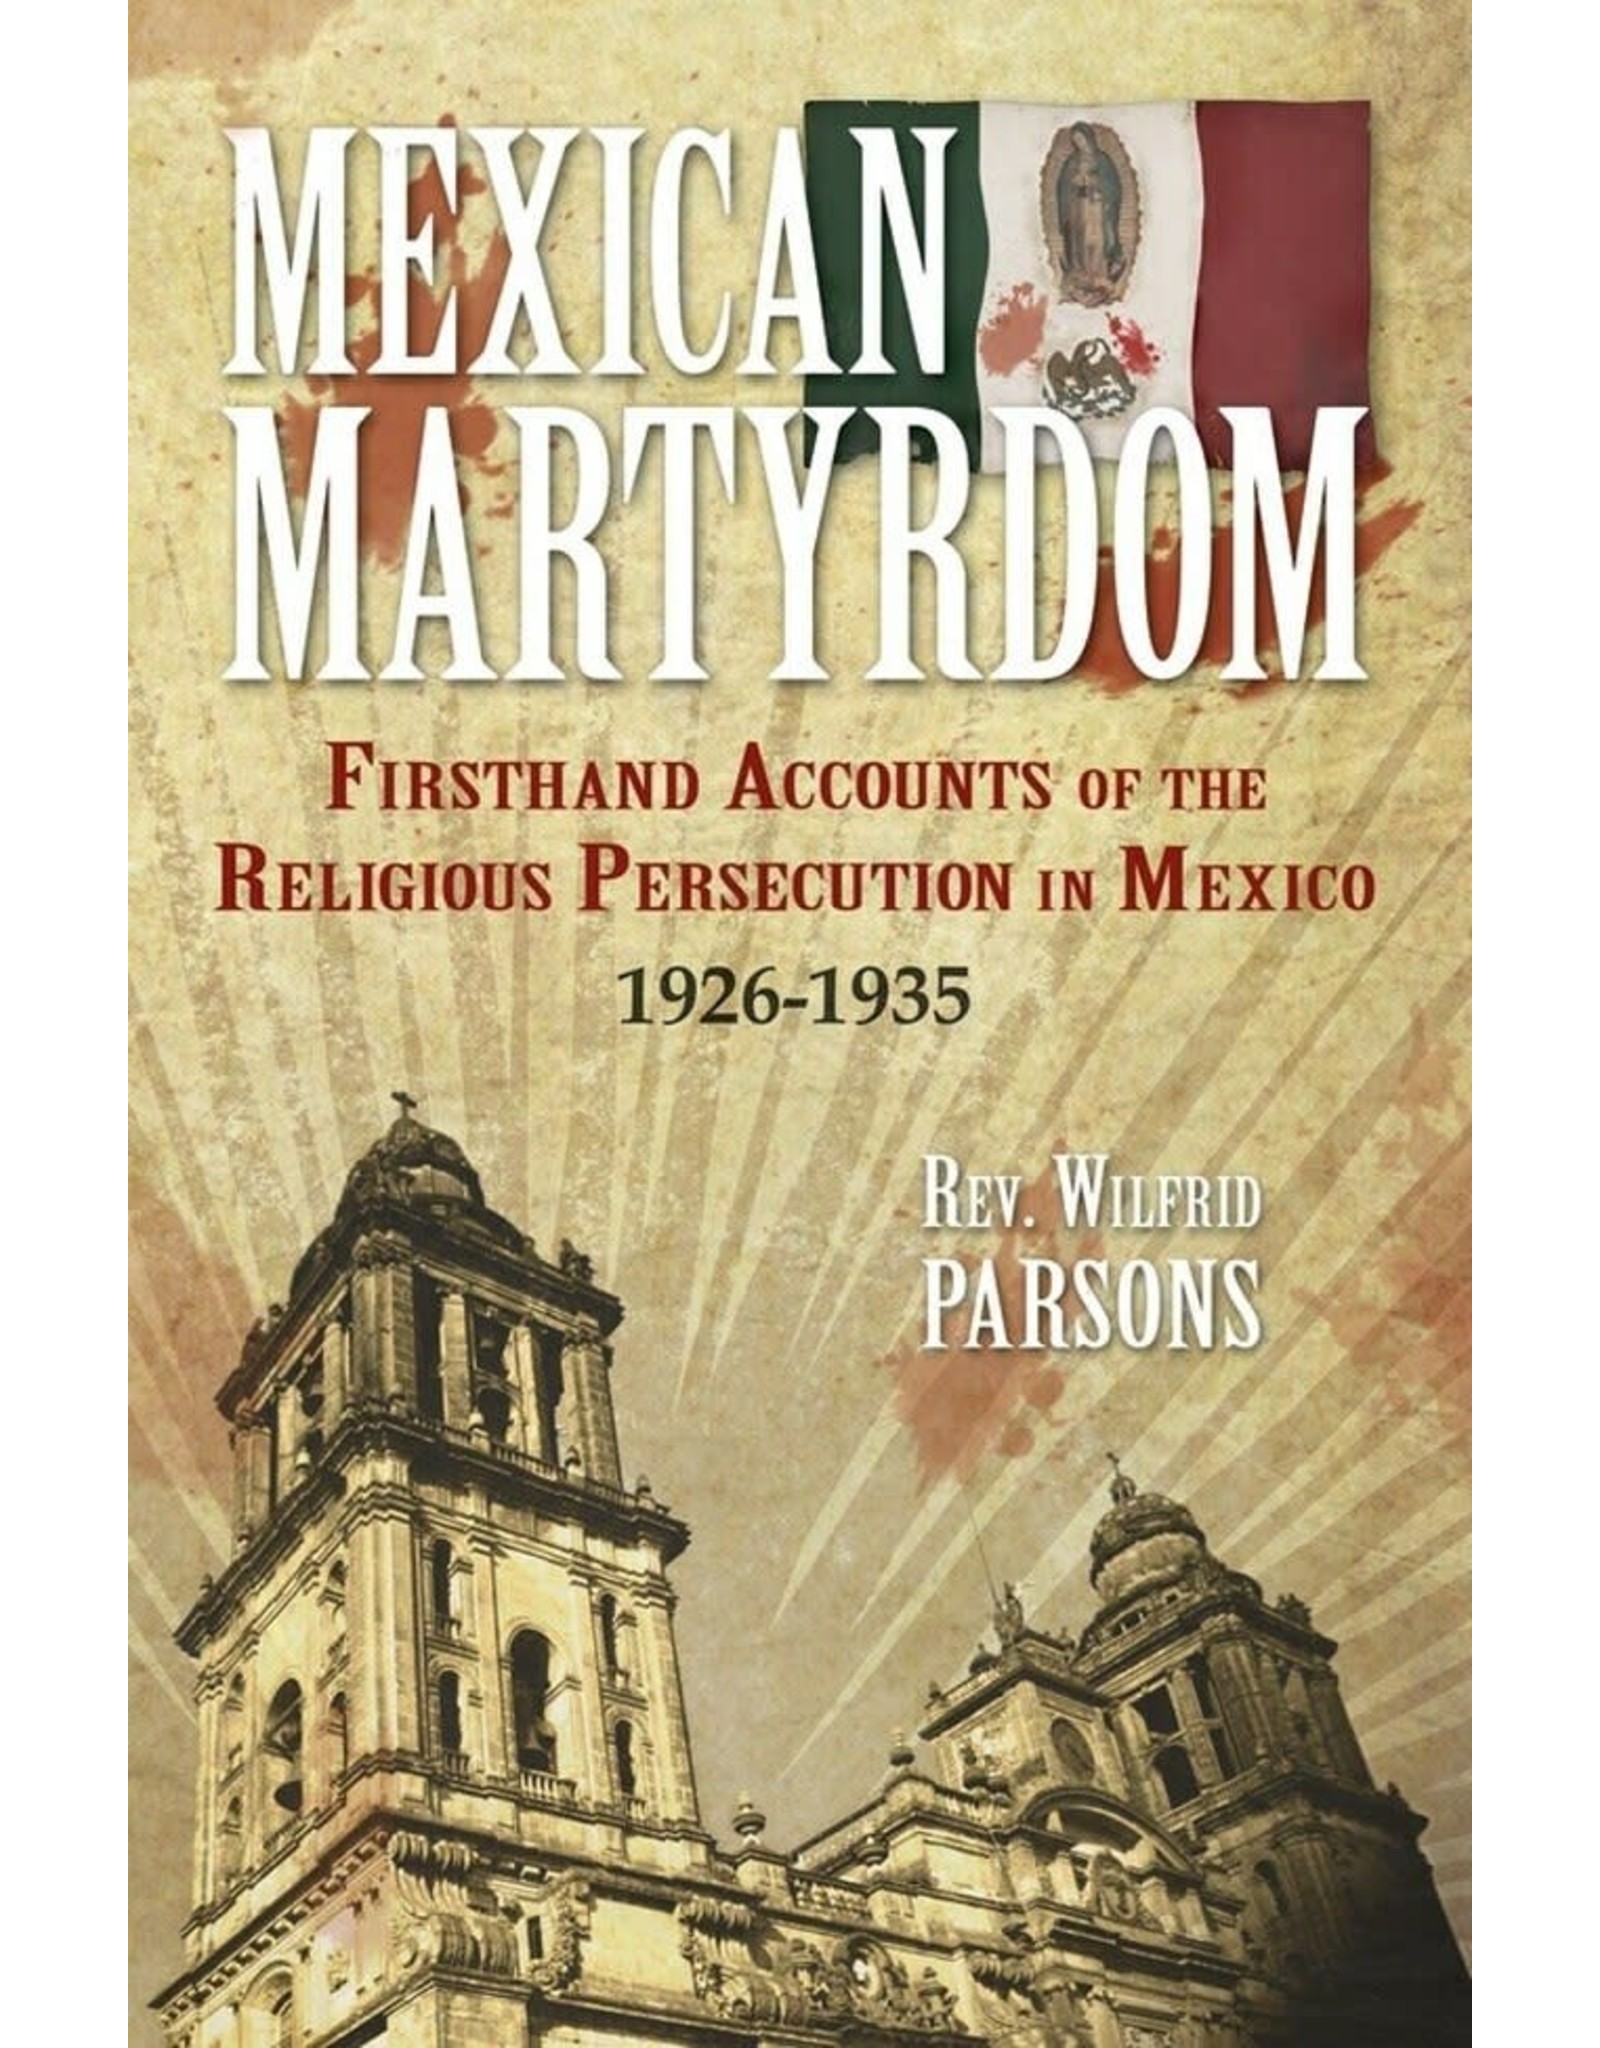 Tan Books Mexican Martyrdom: Firsthand Accounts Of The Religious Persecution In Mexico 1926-1935 by Rev. Fr. Wilfrid Parsons (Paperback)